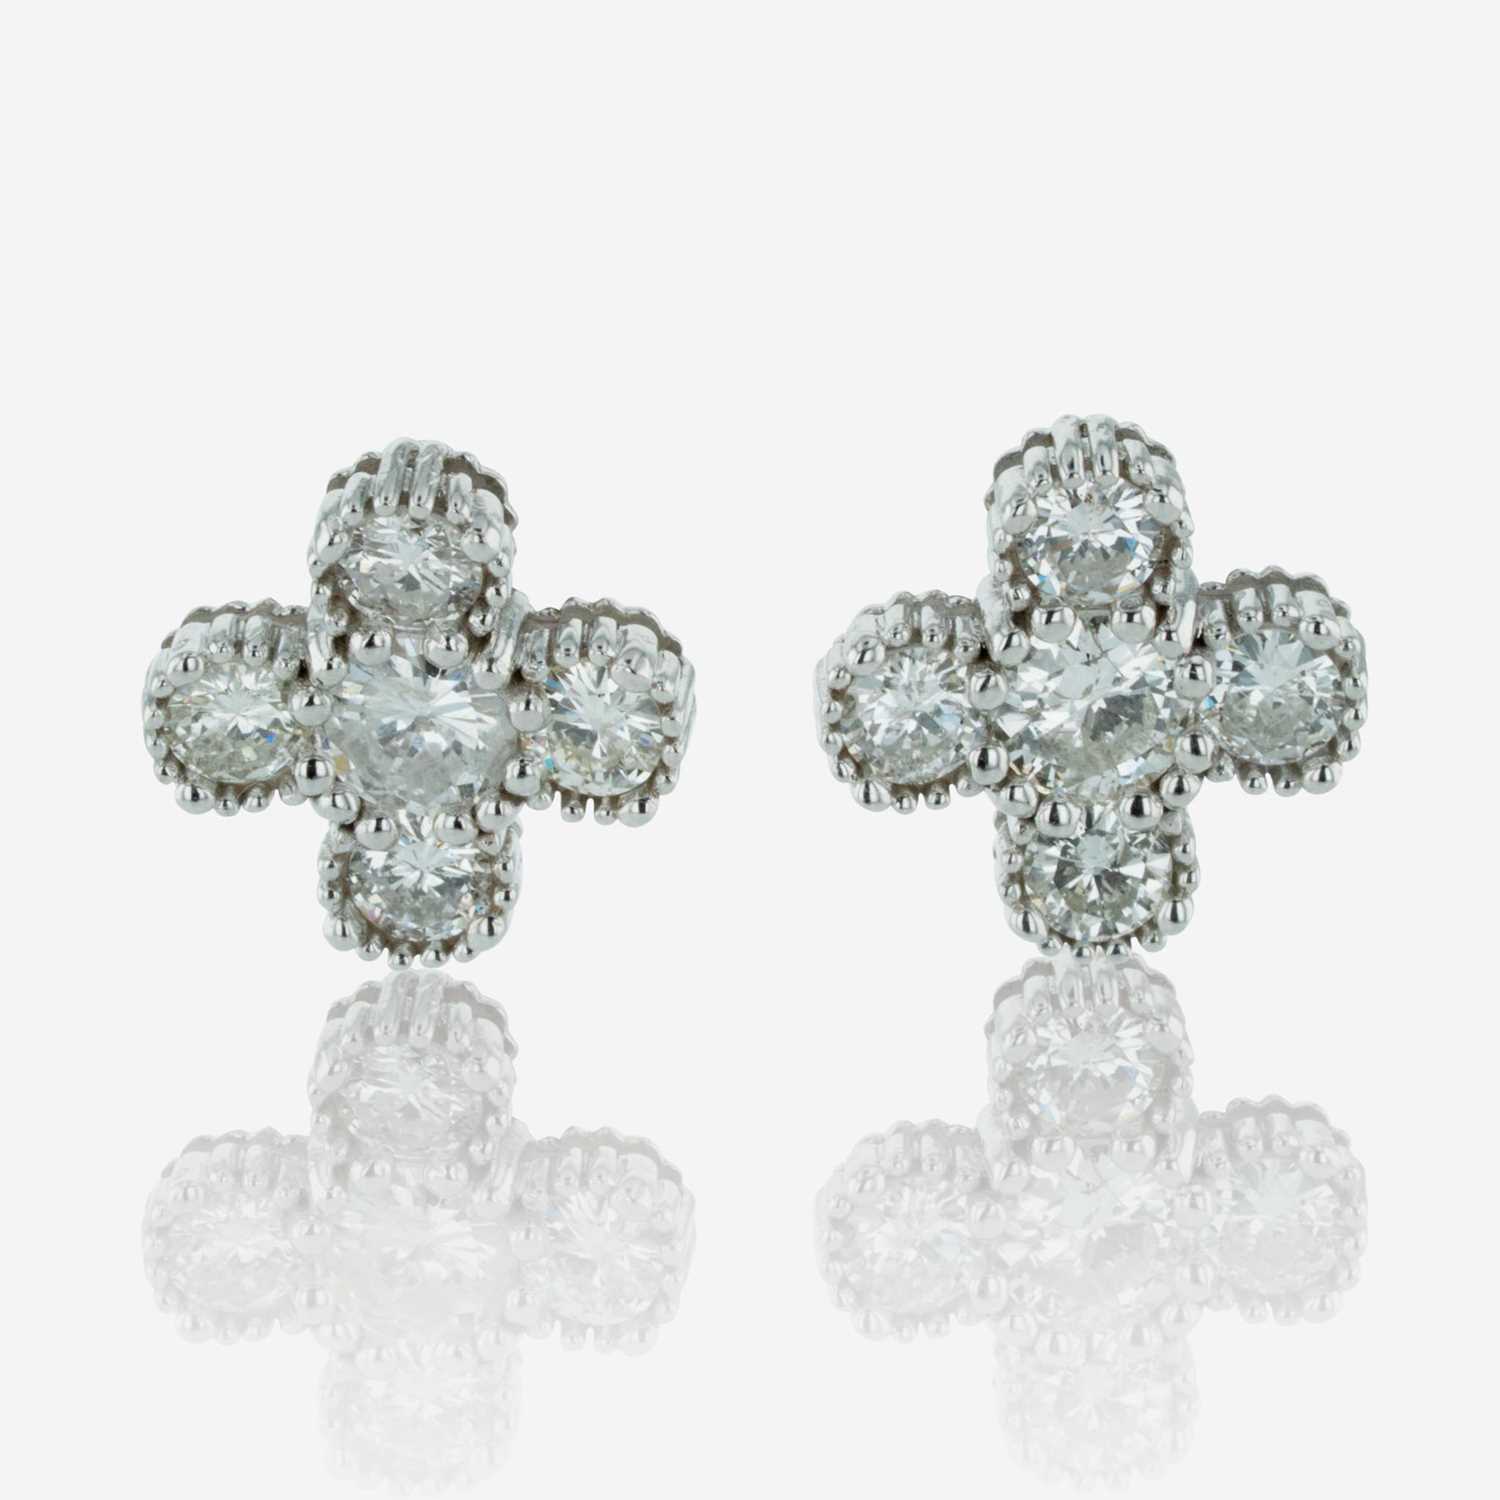 Lot 219 - A Pair of Diamond and 14K White Gold Earrings